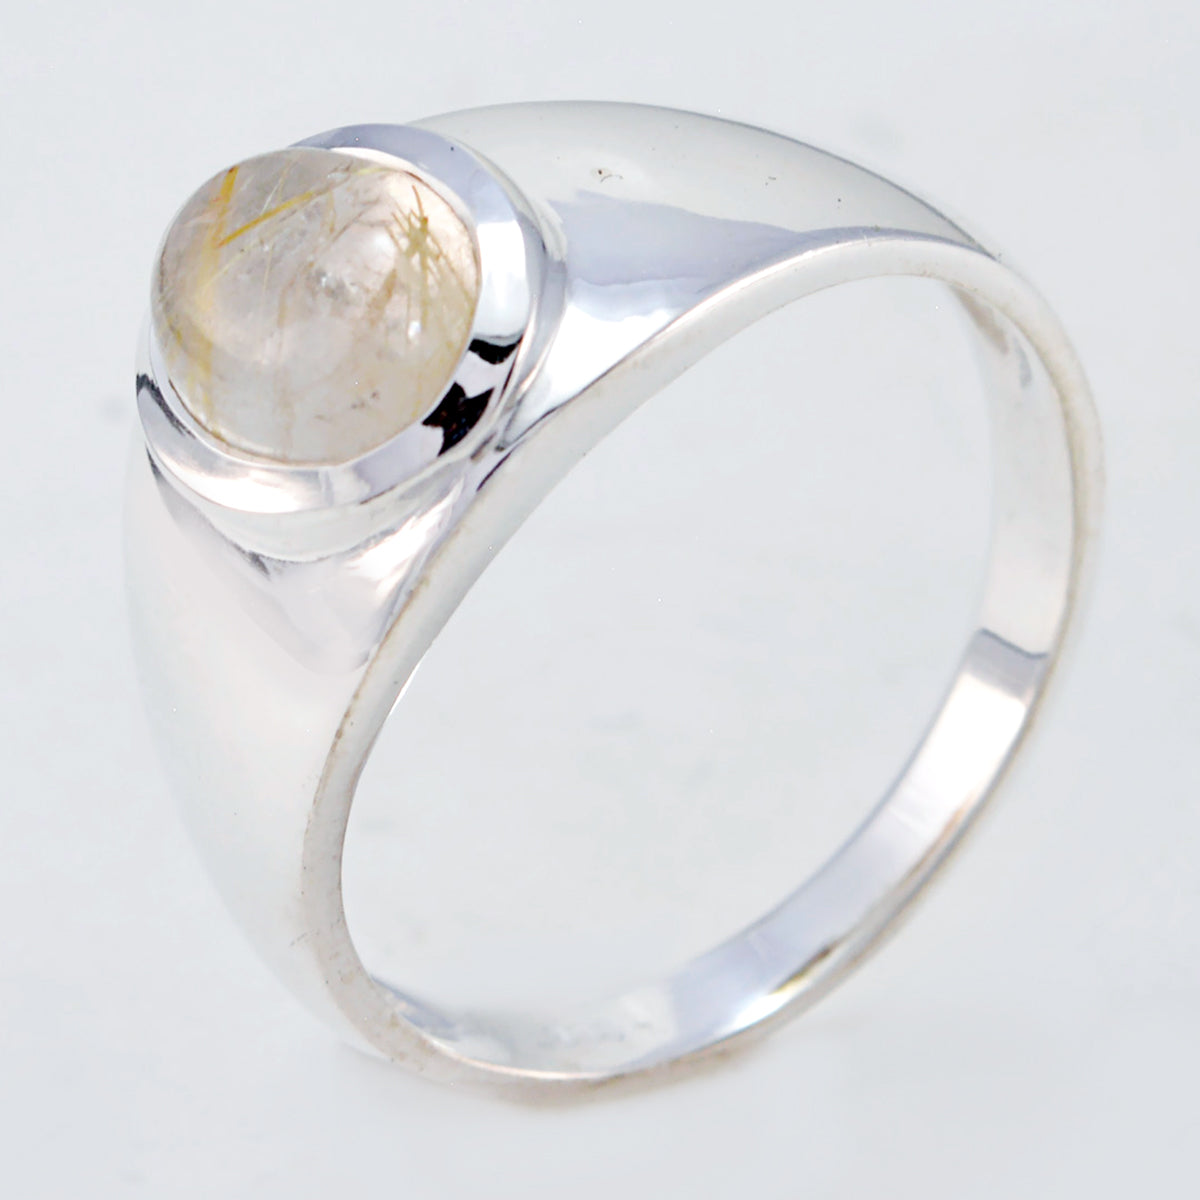 Shapely Gems Rutile Quartz Sterling Silver Ring Jewelry Display Case